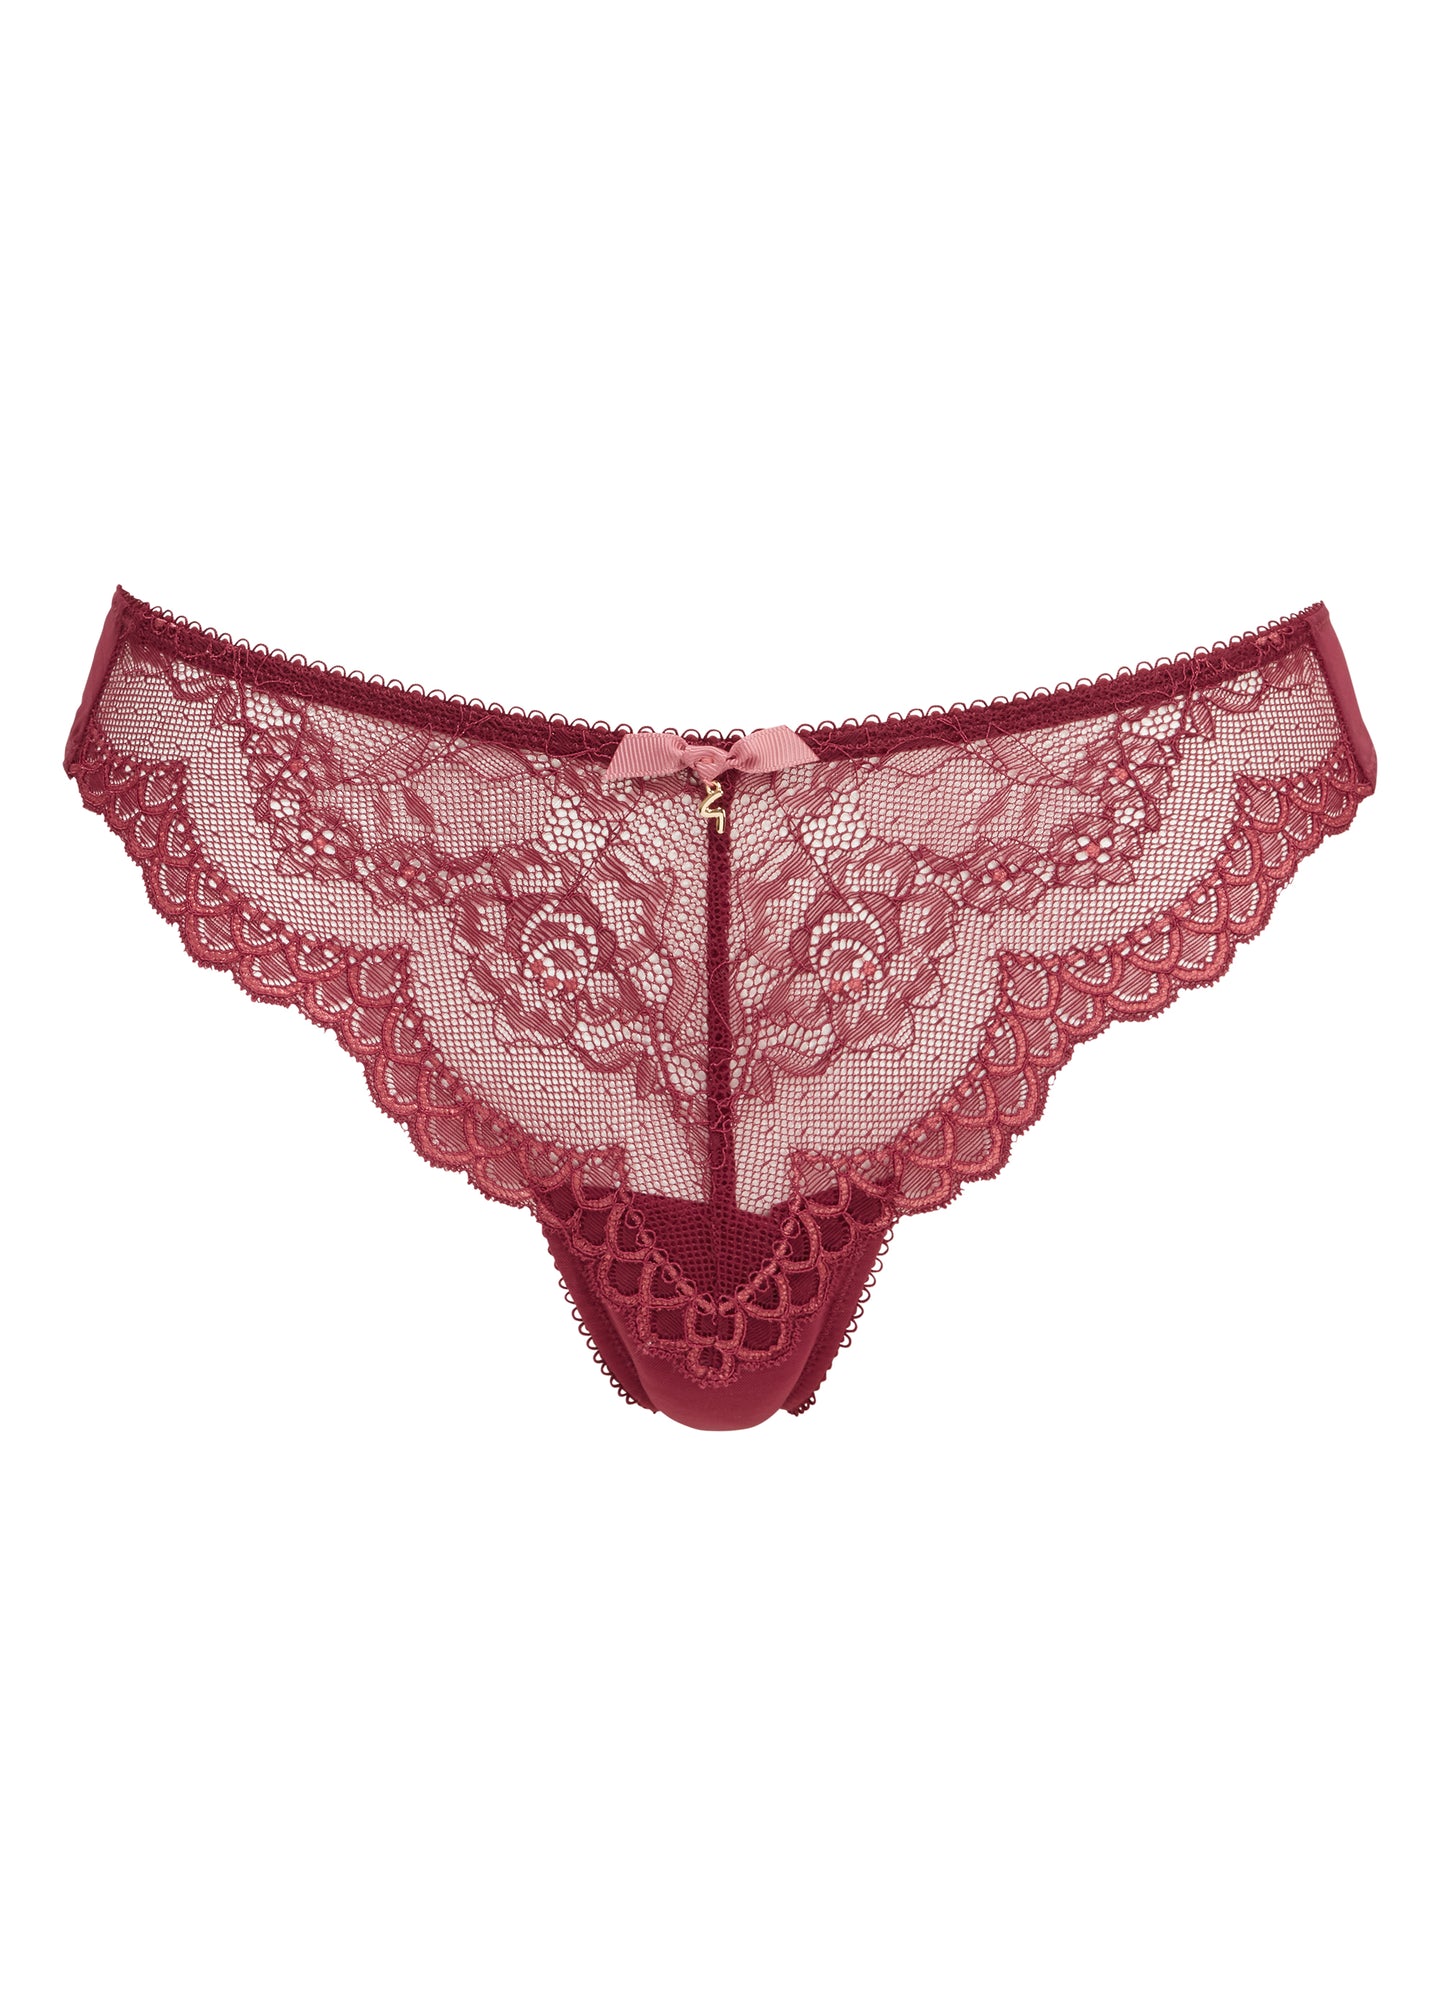 Gossard Superboost Lace Thong -  Cranberry/Raspberry Sorbet